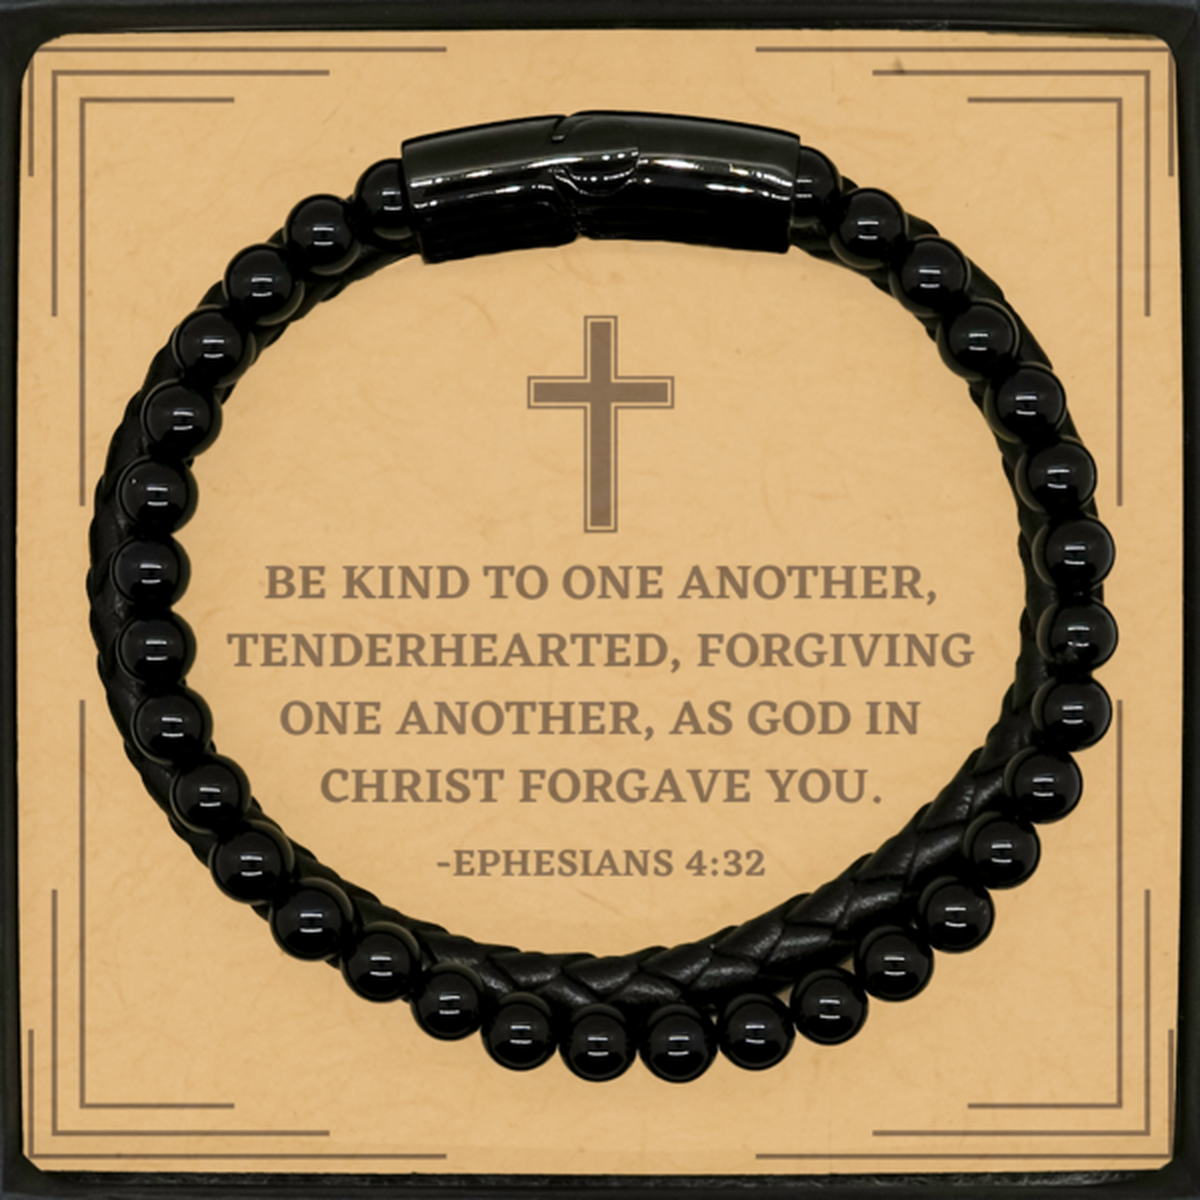 Baptism Gifts For Teenage Boys Girls, Christian Bible Verse Stone Leather Bracelet, Be kind to one another, Confirmation Gifts, Bible Verse Card for Son, Godson, Grandson